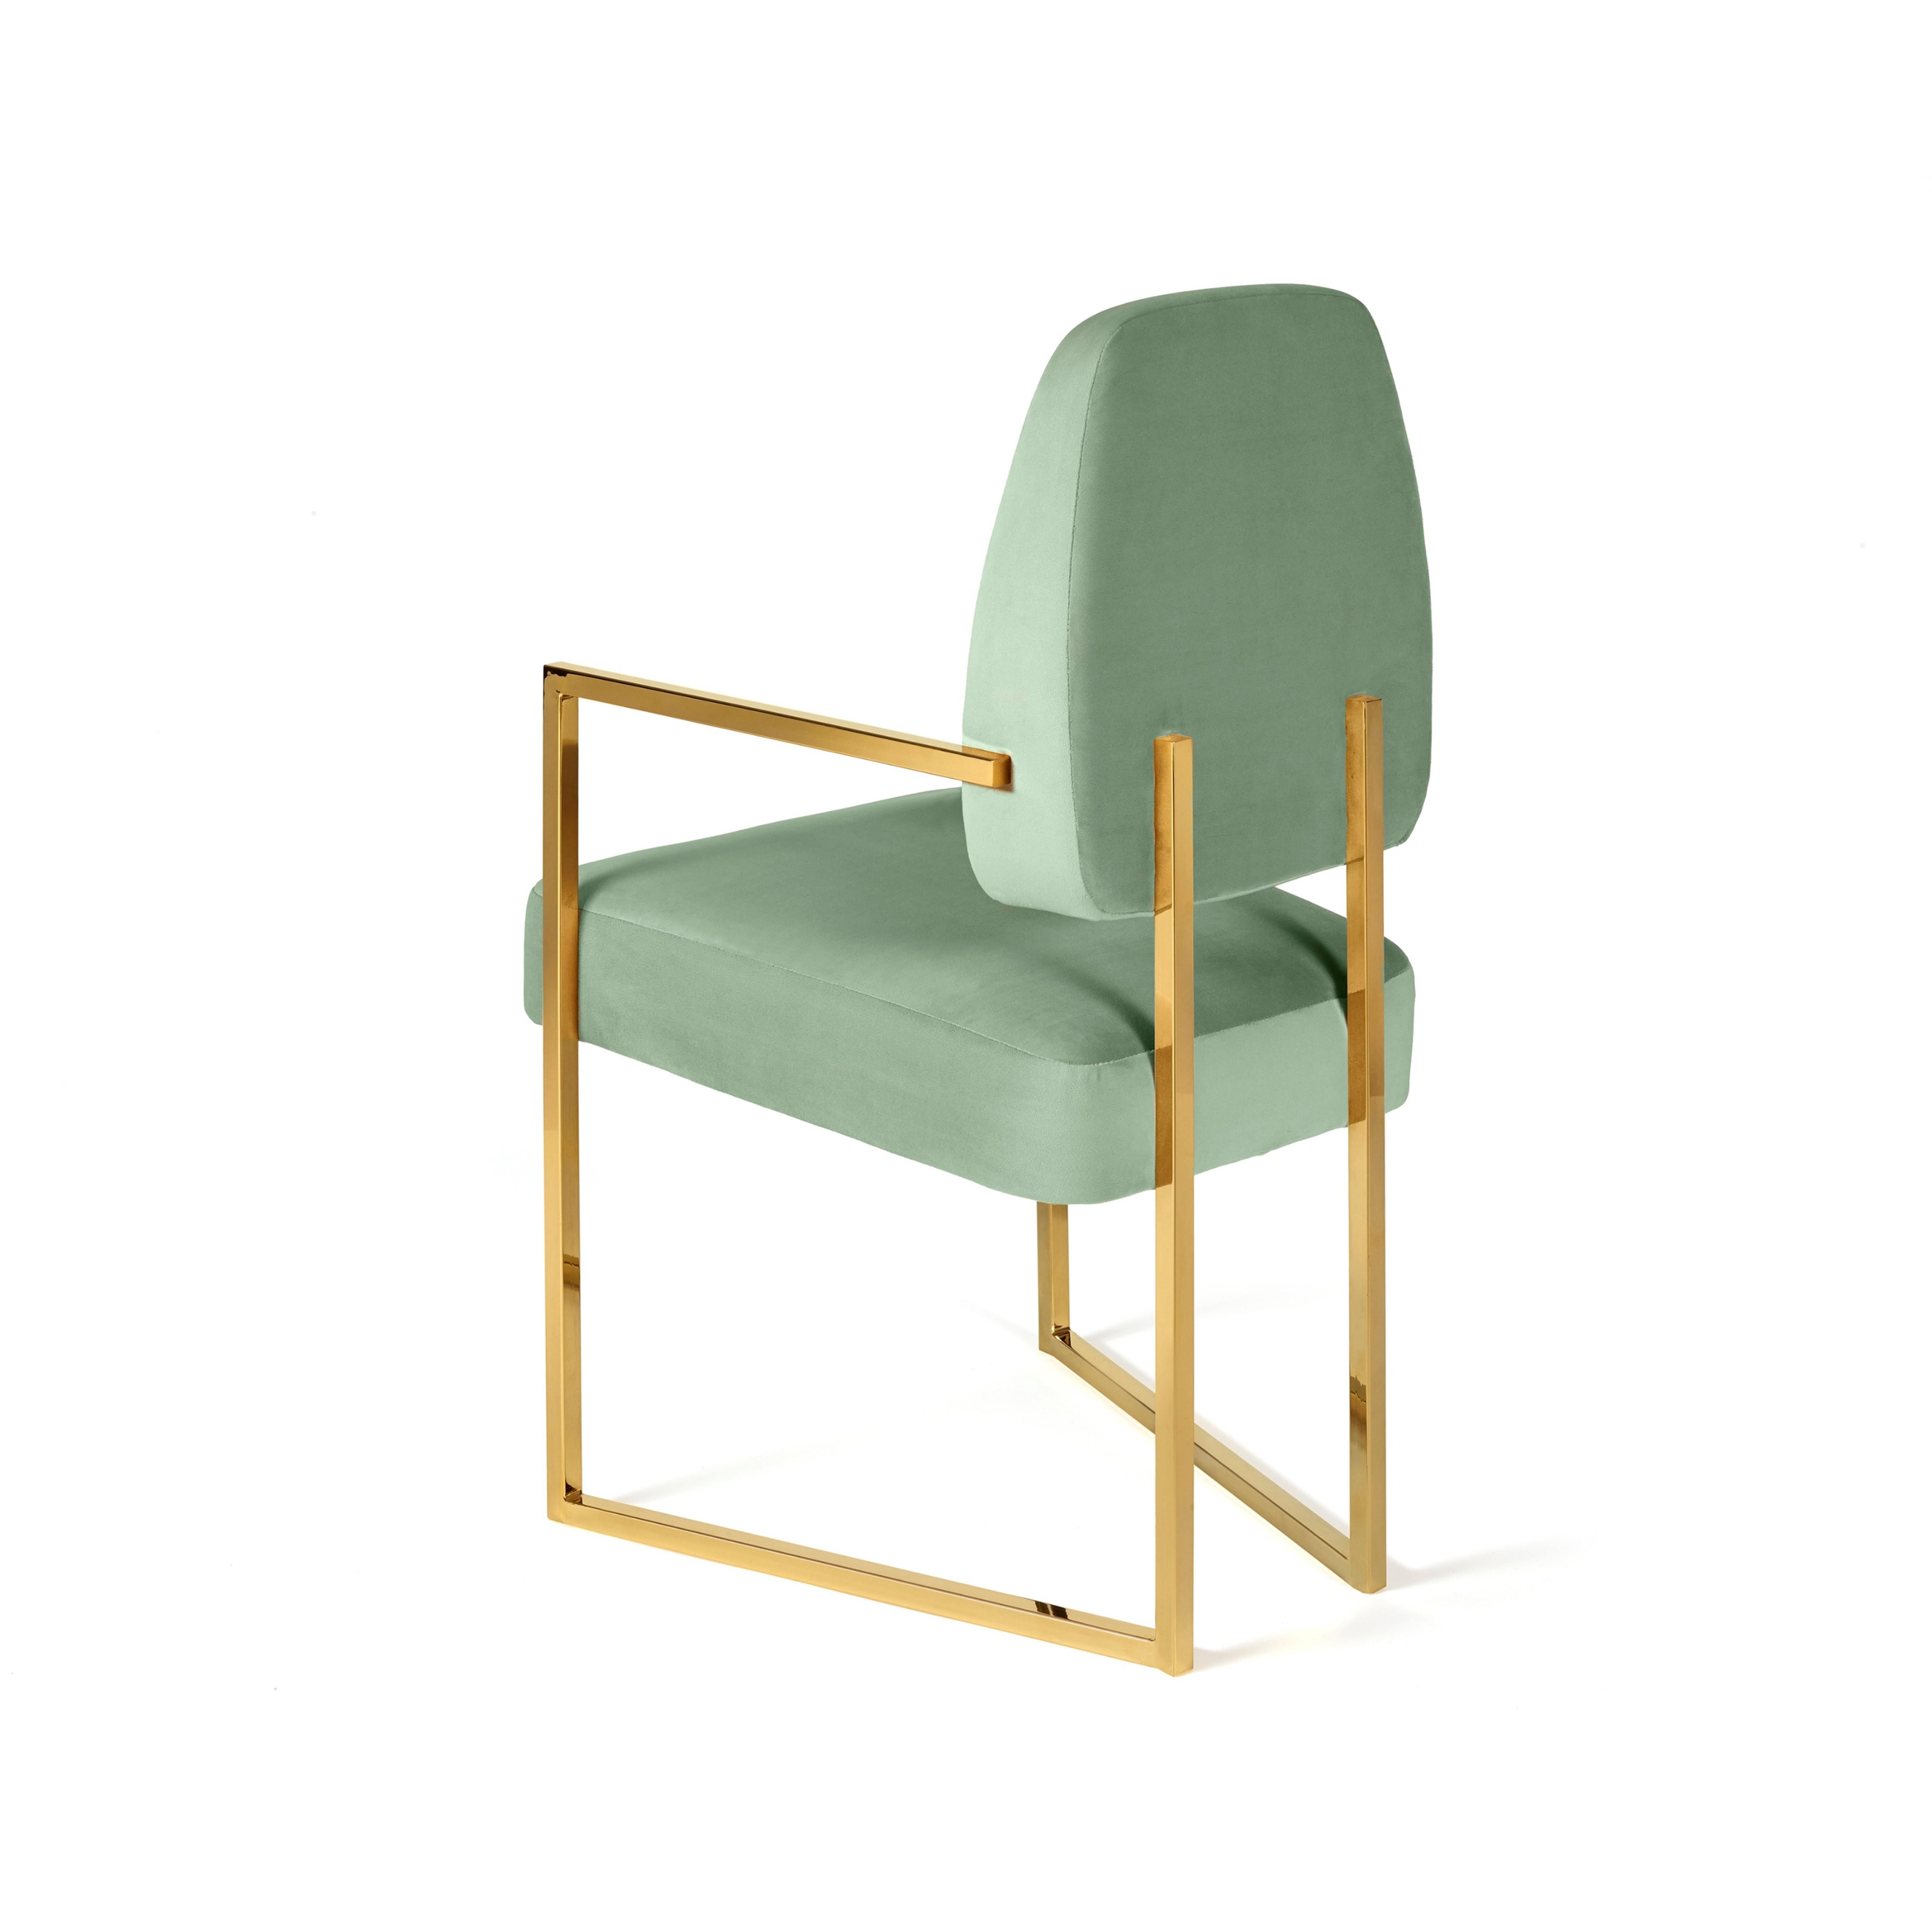 Modern Perspective Dining Chair, COM, InsidherLand by Joana Santos Barbosa For Sale